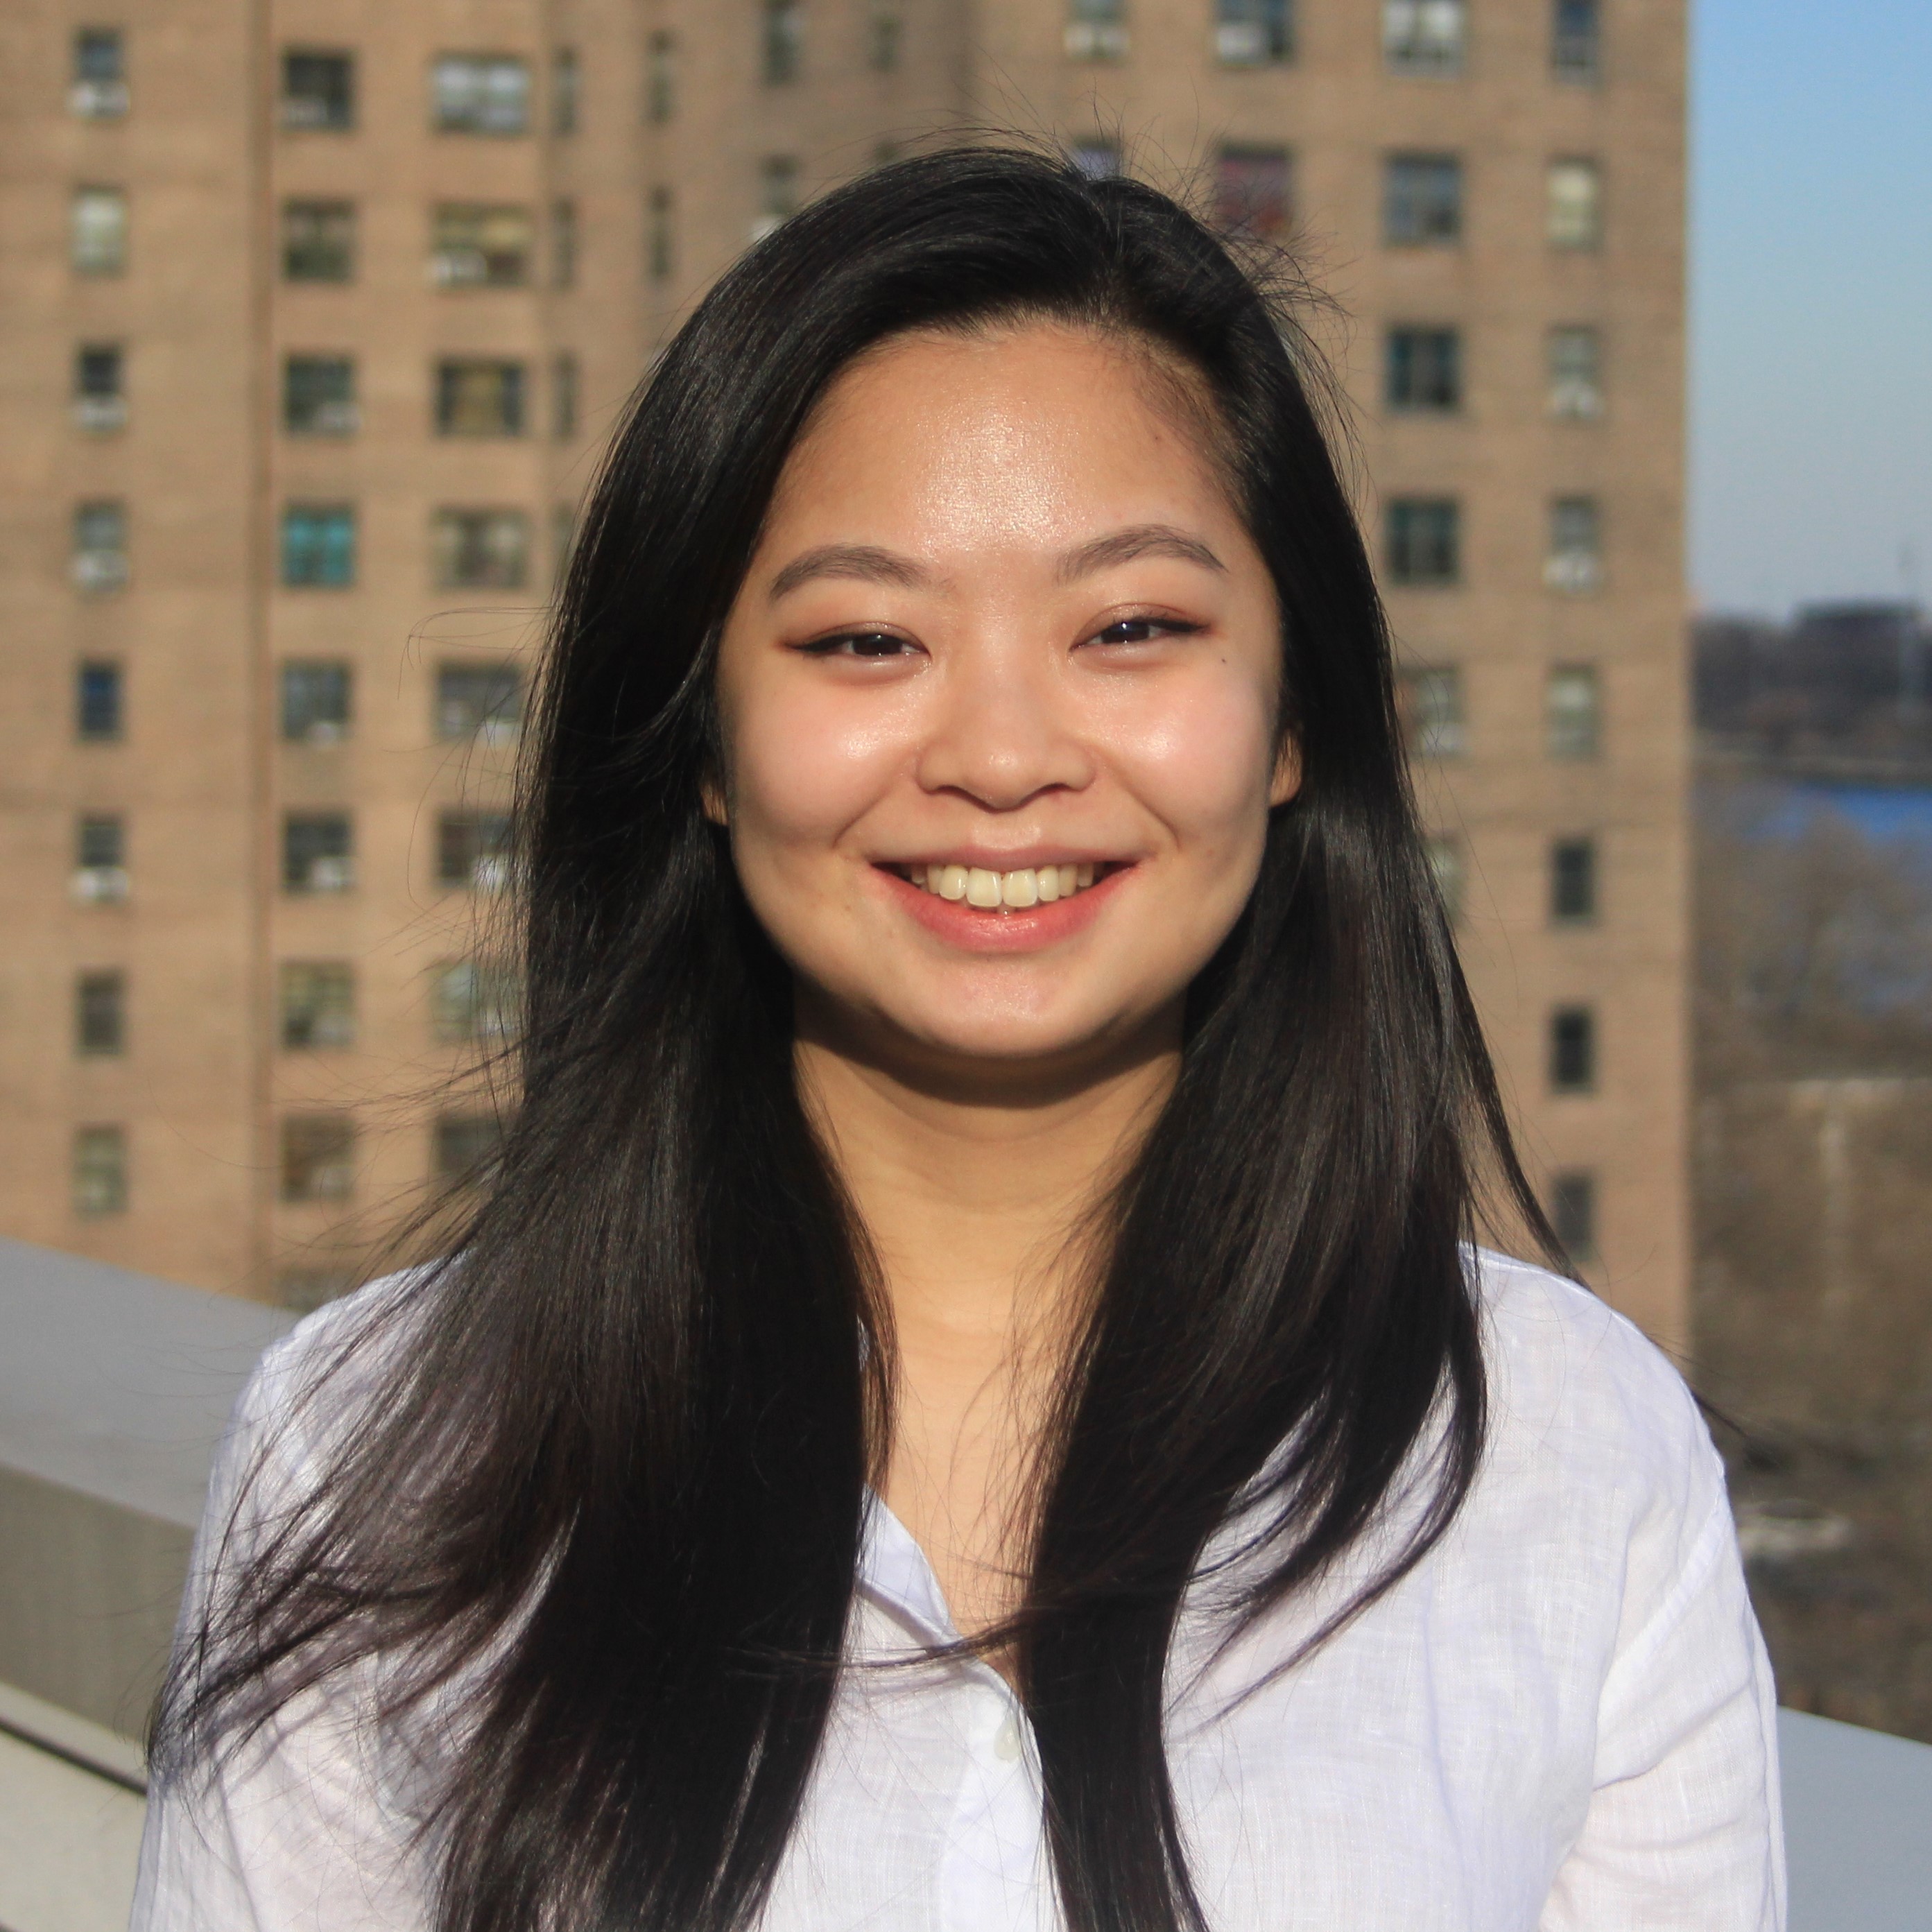 Connie was born and raised in New Jersey and studied Cognitive Science and Piano Performance at Northwestern University. She moved back to the east coast after graduation and now currently works as a software engineer at a startup.